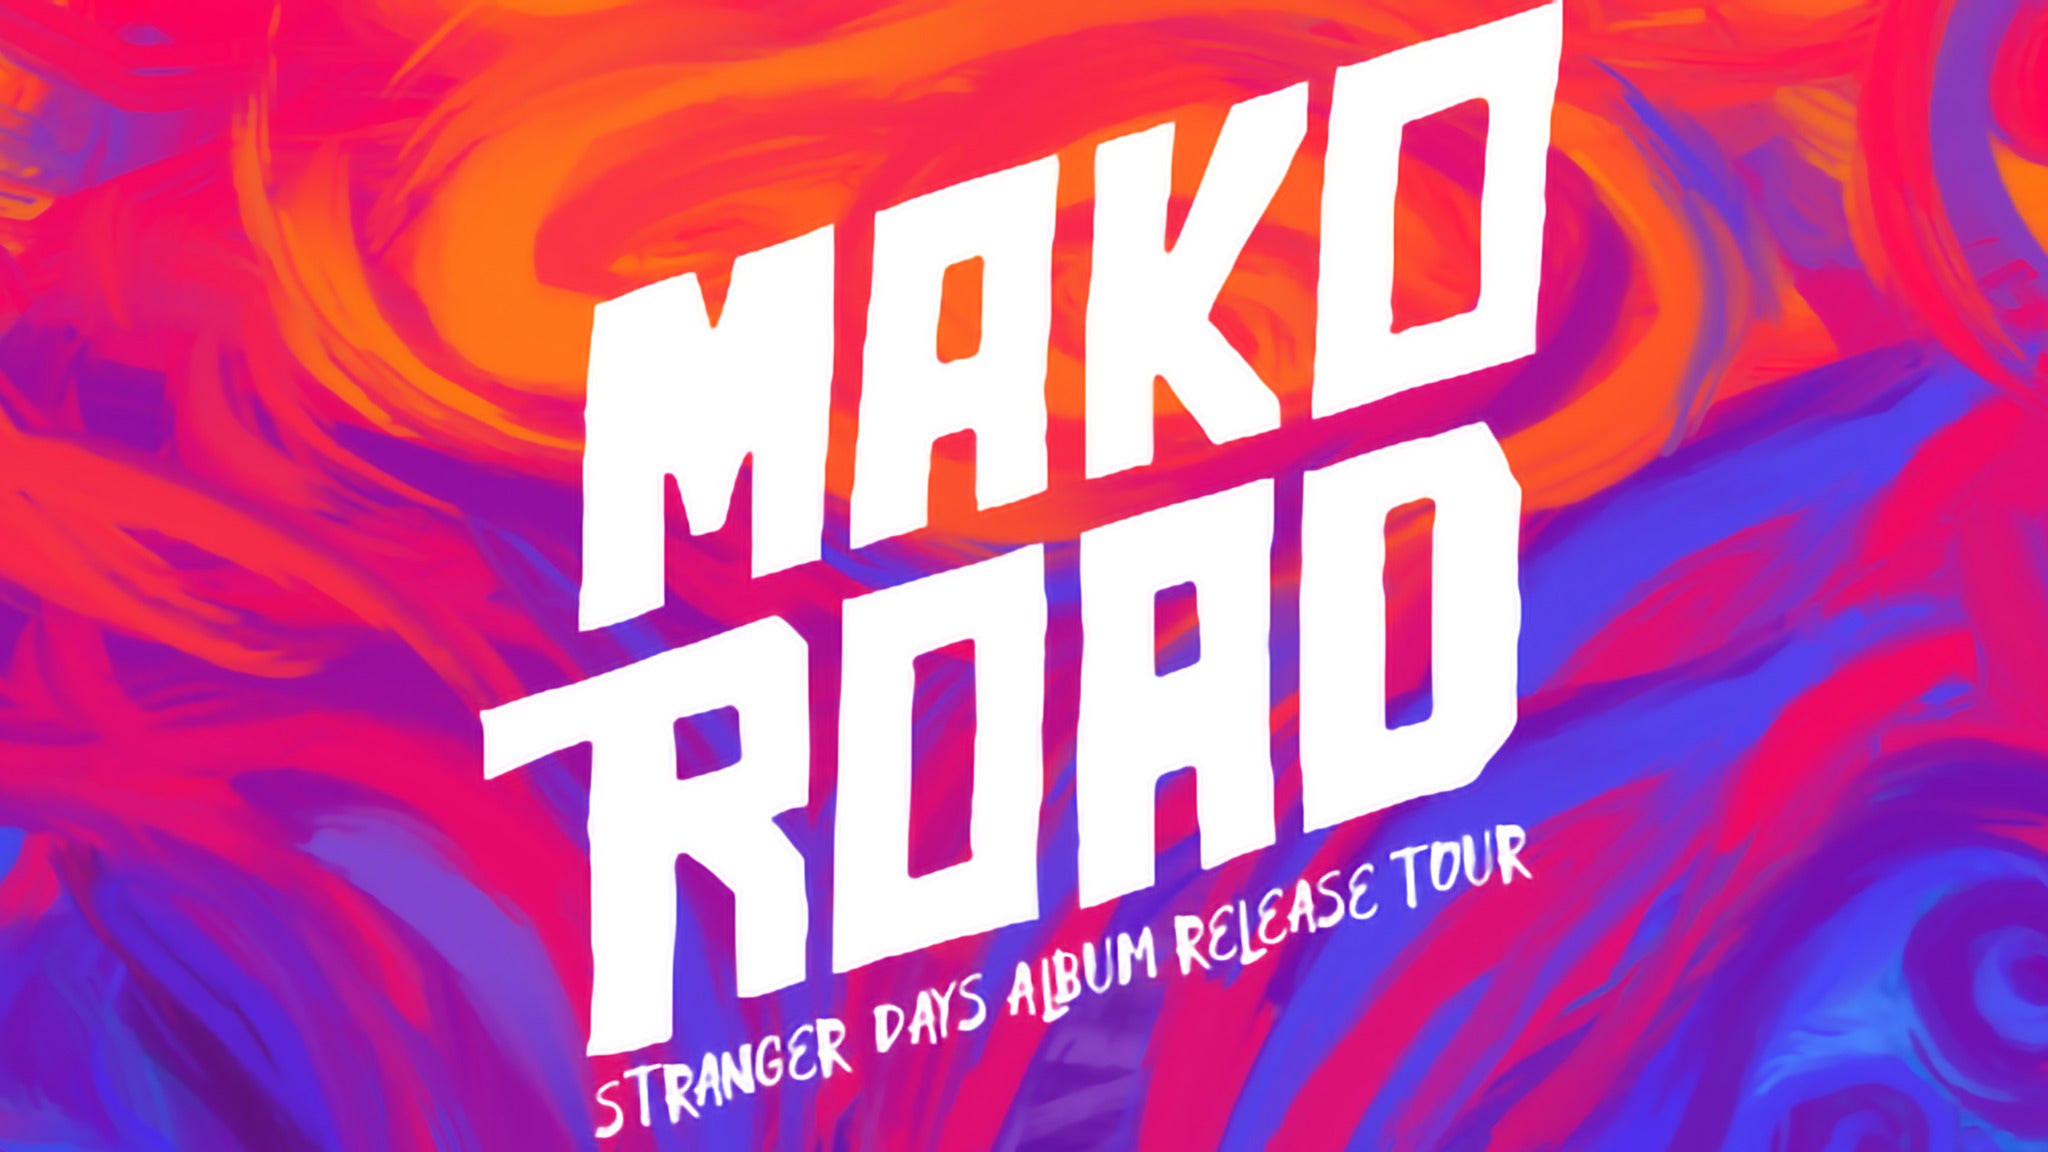 Image used with permission from Ticketmaster | Mako Road - Stranger Days Tour tickets